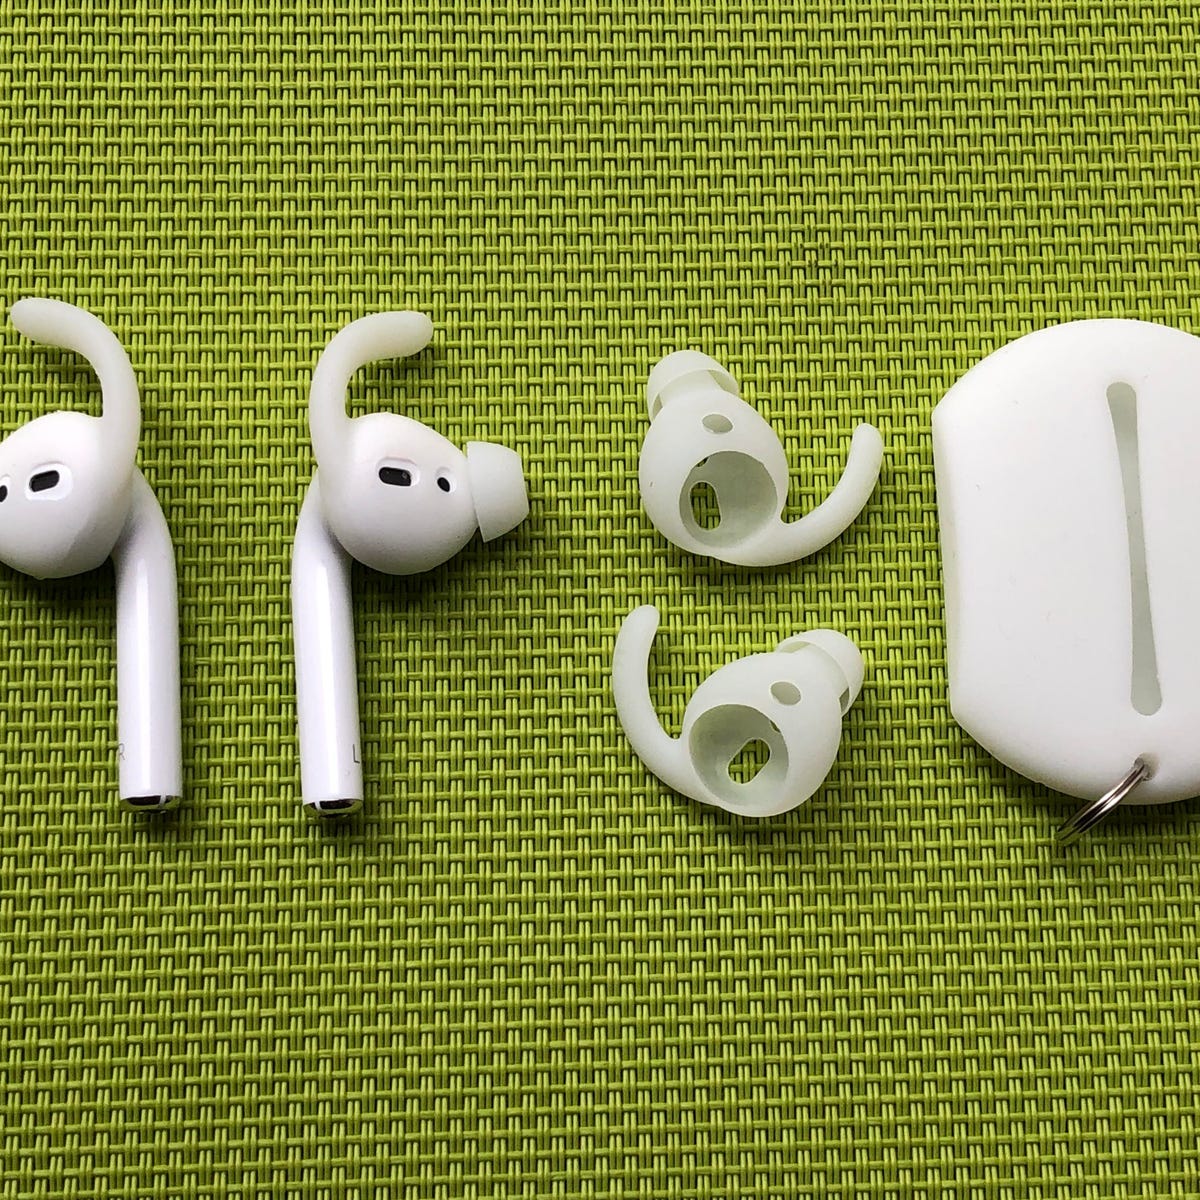 Spole tilbage Statistisk Afbestille How to keep AirPods and AirPods Pro from falling out of your ears - CNET